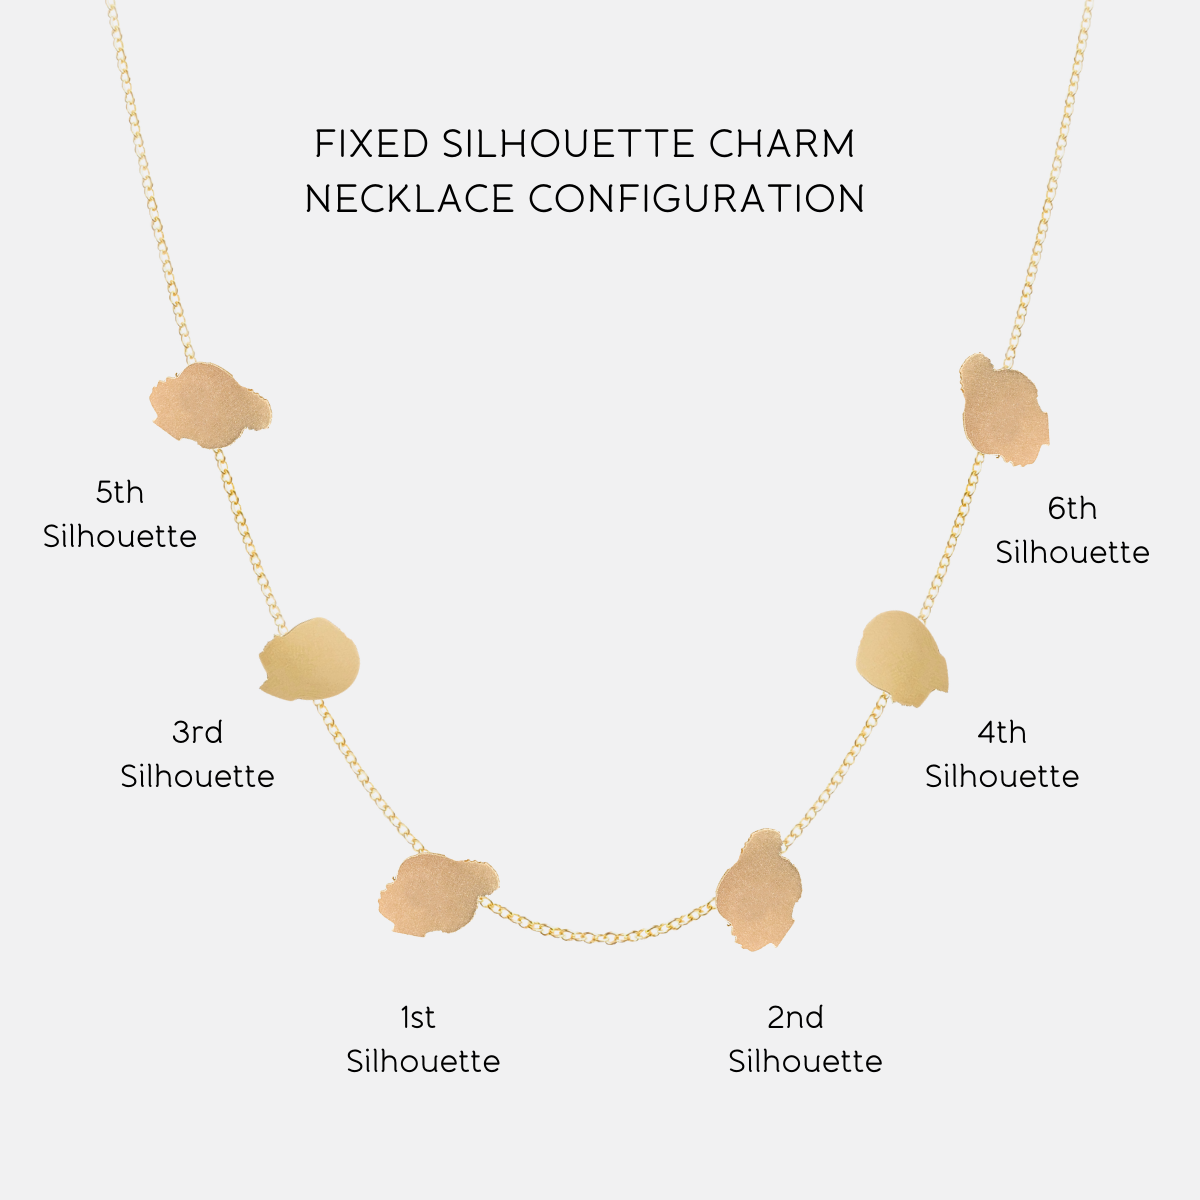 Fixed Silhouette Charm Necklace